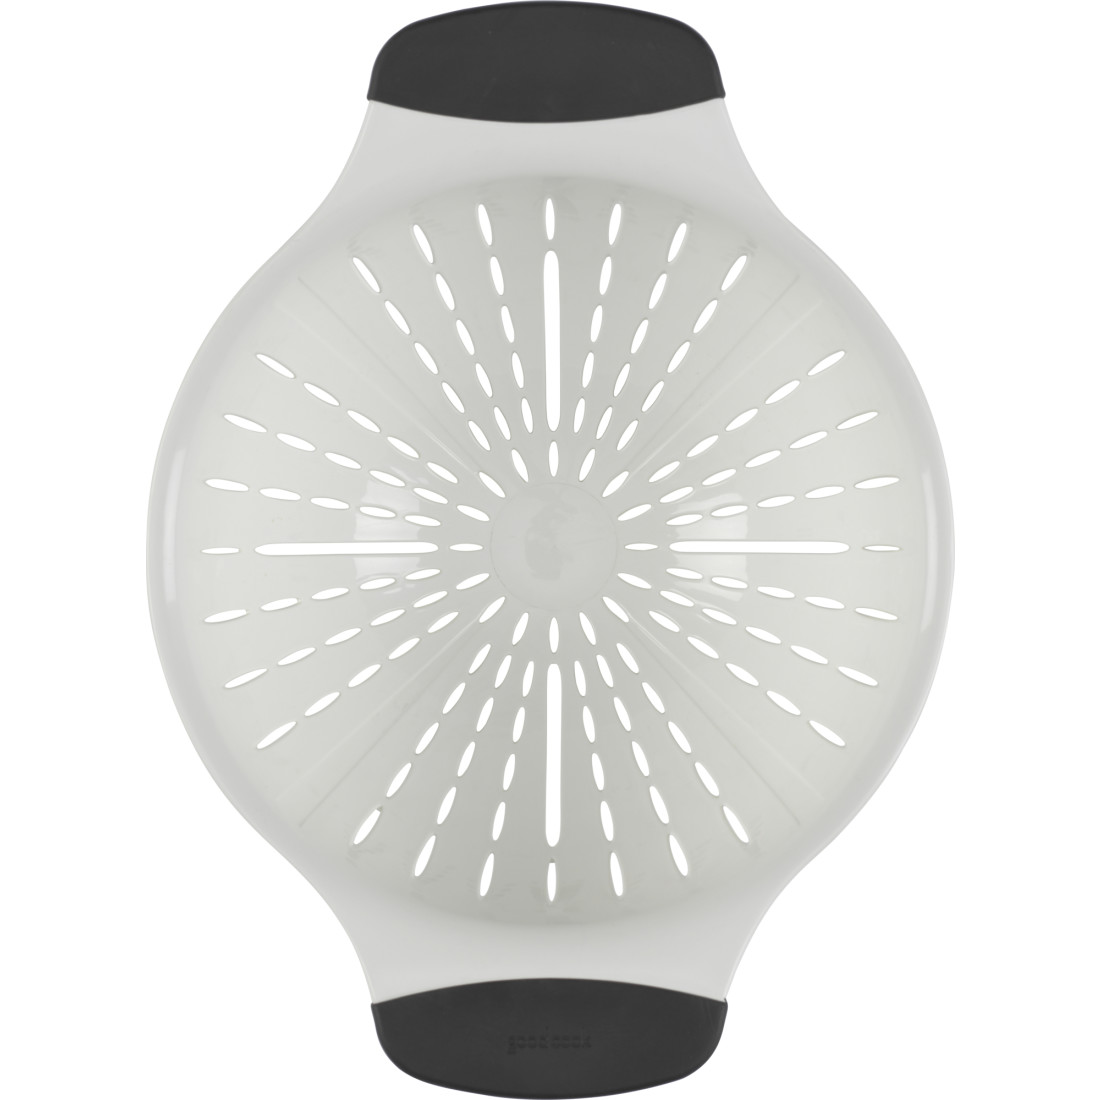 OXO Good Grips Over the Counter Colander